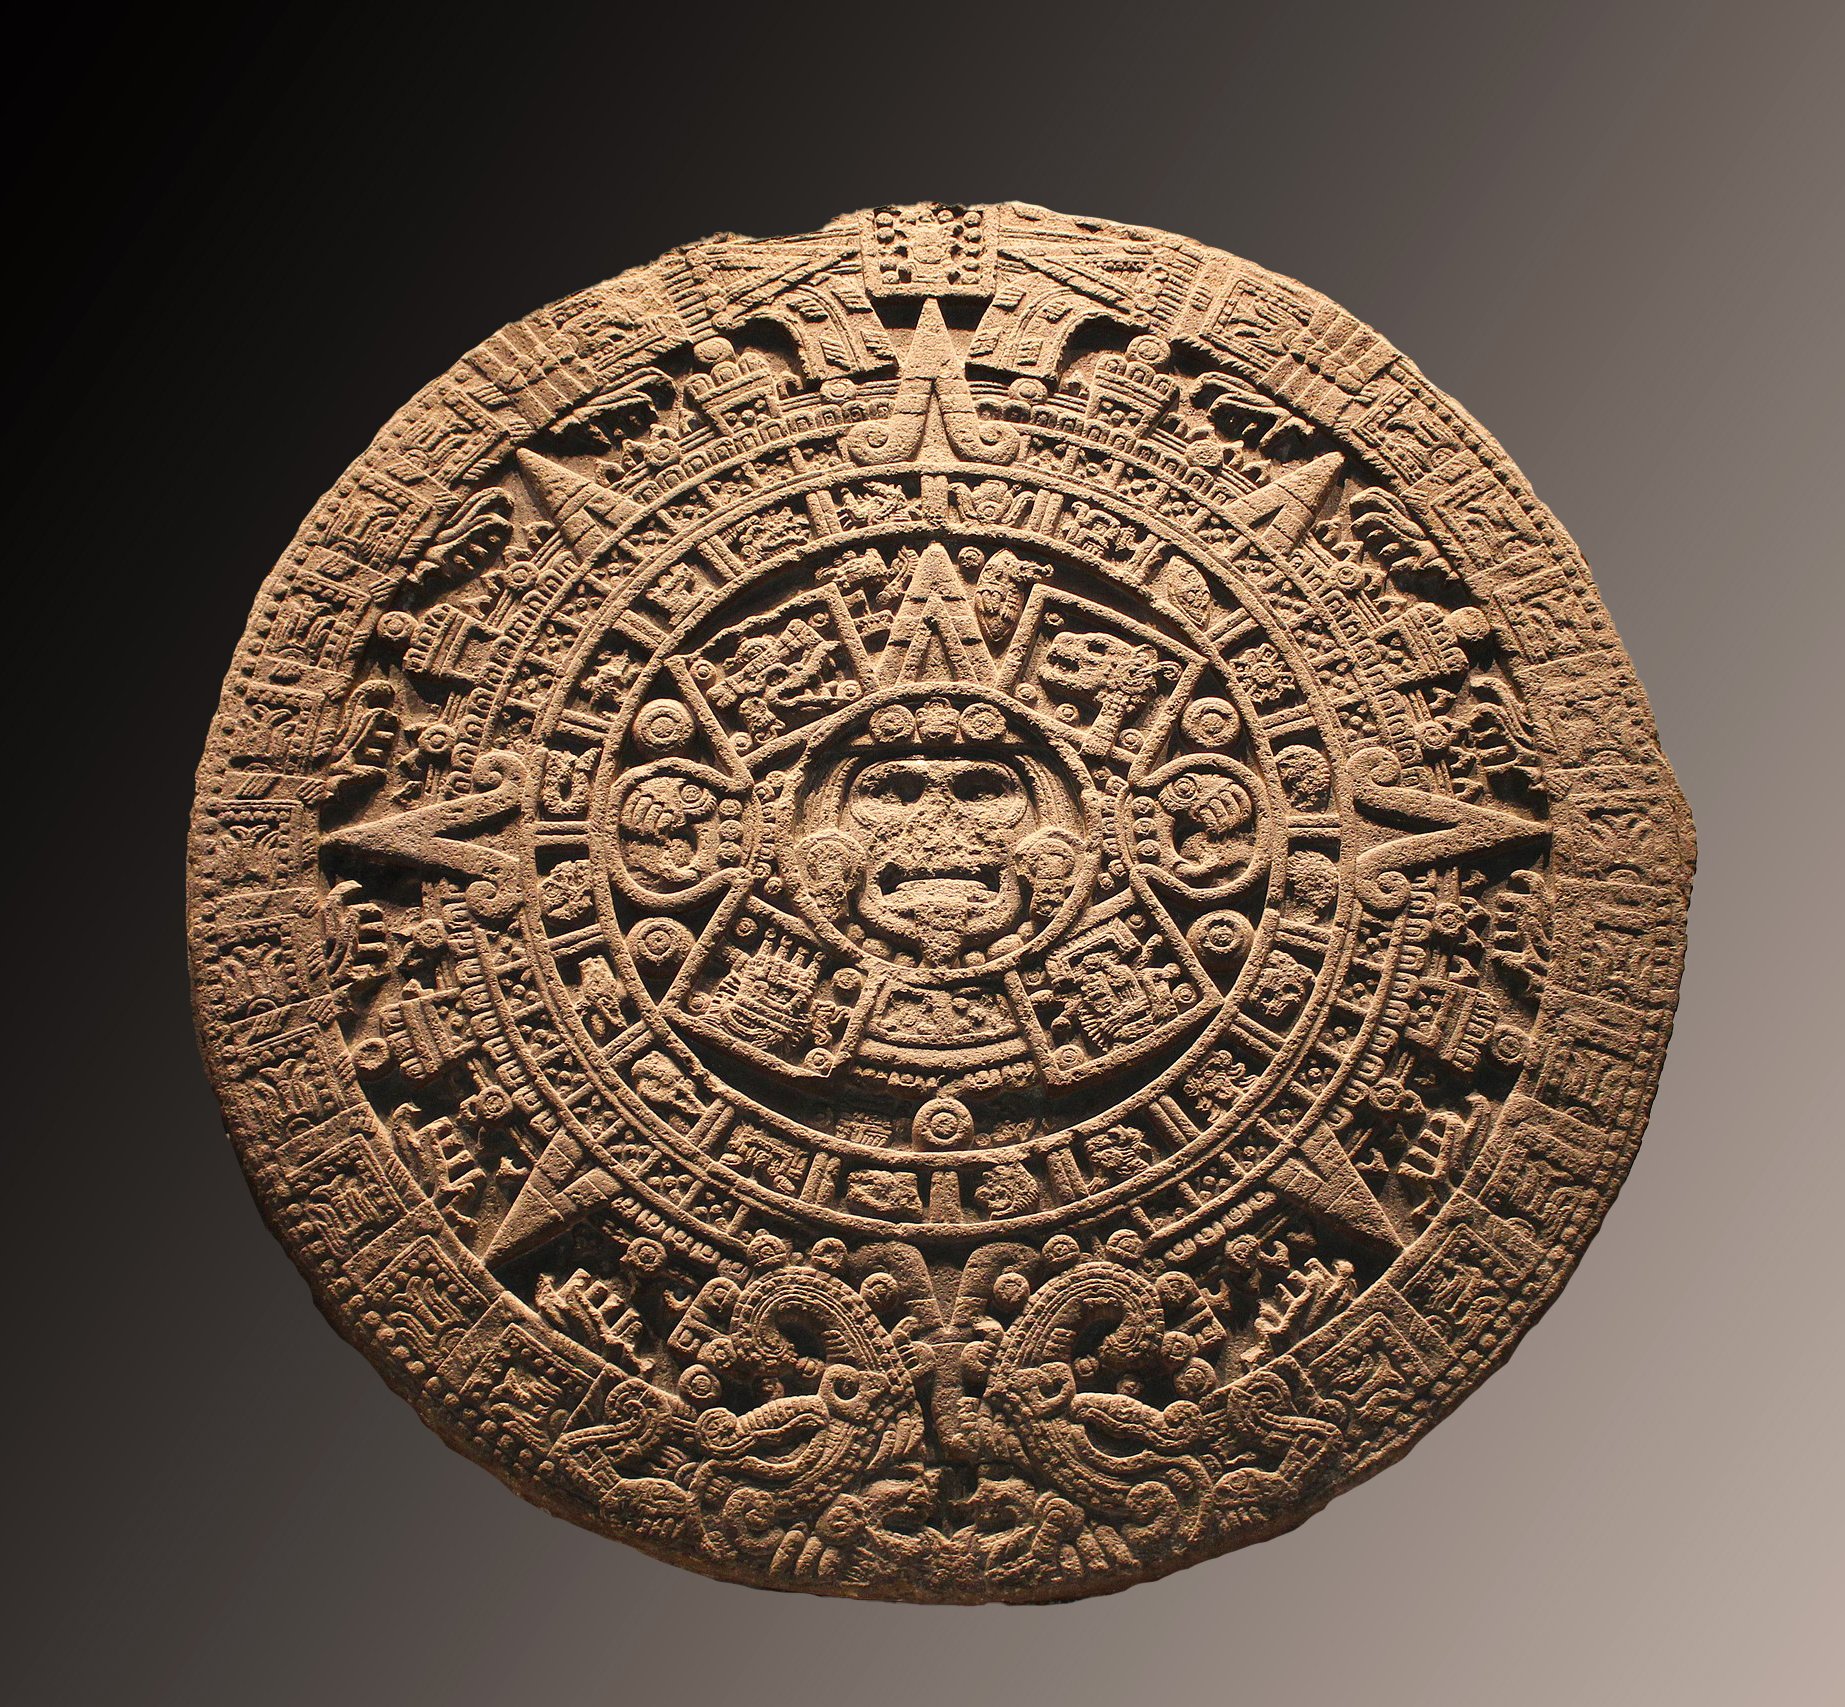 A photo of an ancient Mayan calendar stone. The stone is circular in shape and has intricate carvings on it. The center of the stone has a face with a tongue sticking out. The outer ring of the stone has various symbols and figures carved into it. The stone is a brownish color and appears to be made of a type of rock or clay. The background is black, which makes the stone stand out.